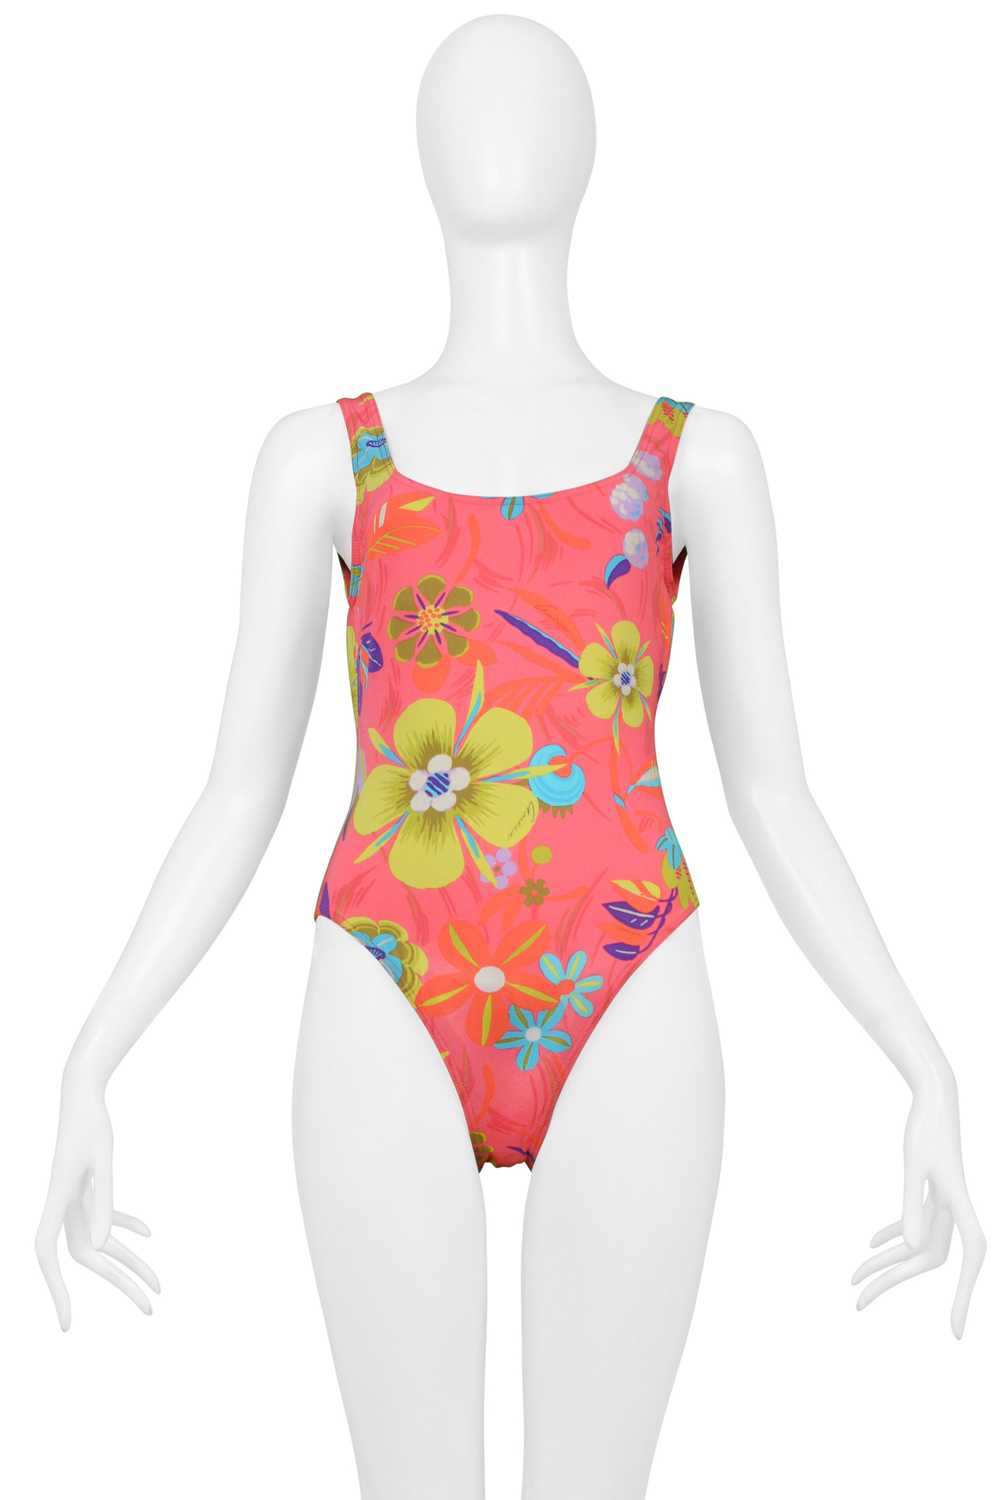 GUCCI BY TOM FORD PINK FLORAL PRINT ONE PIECE SWI… - image 2